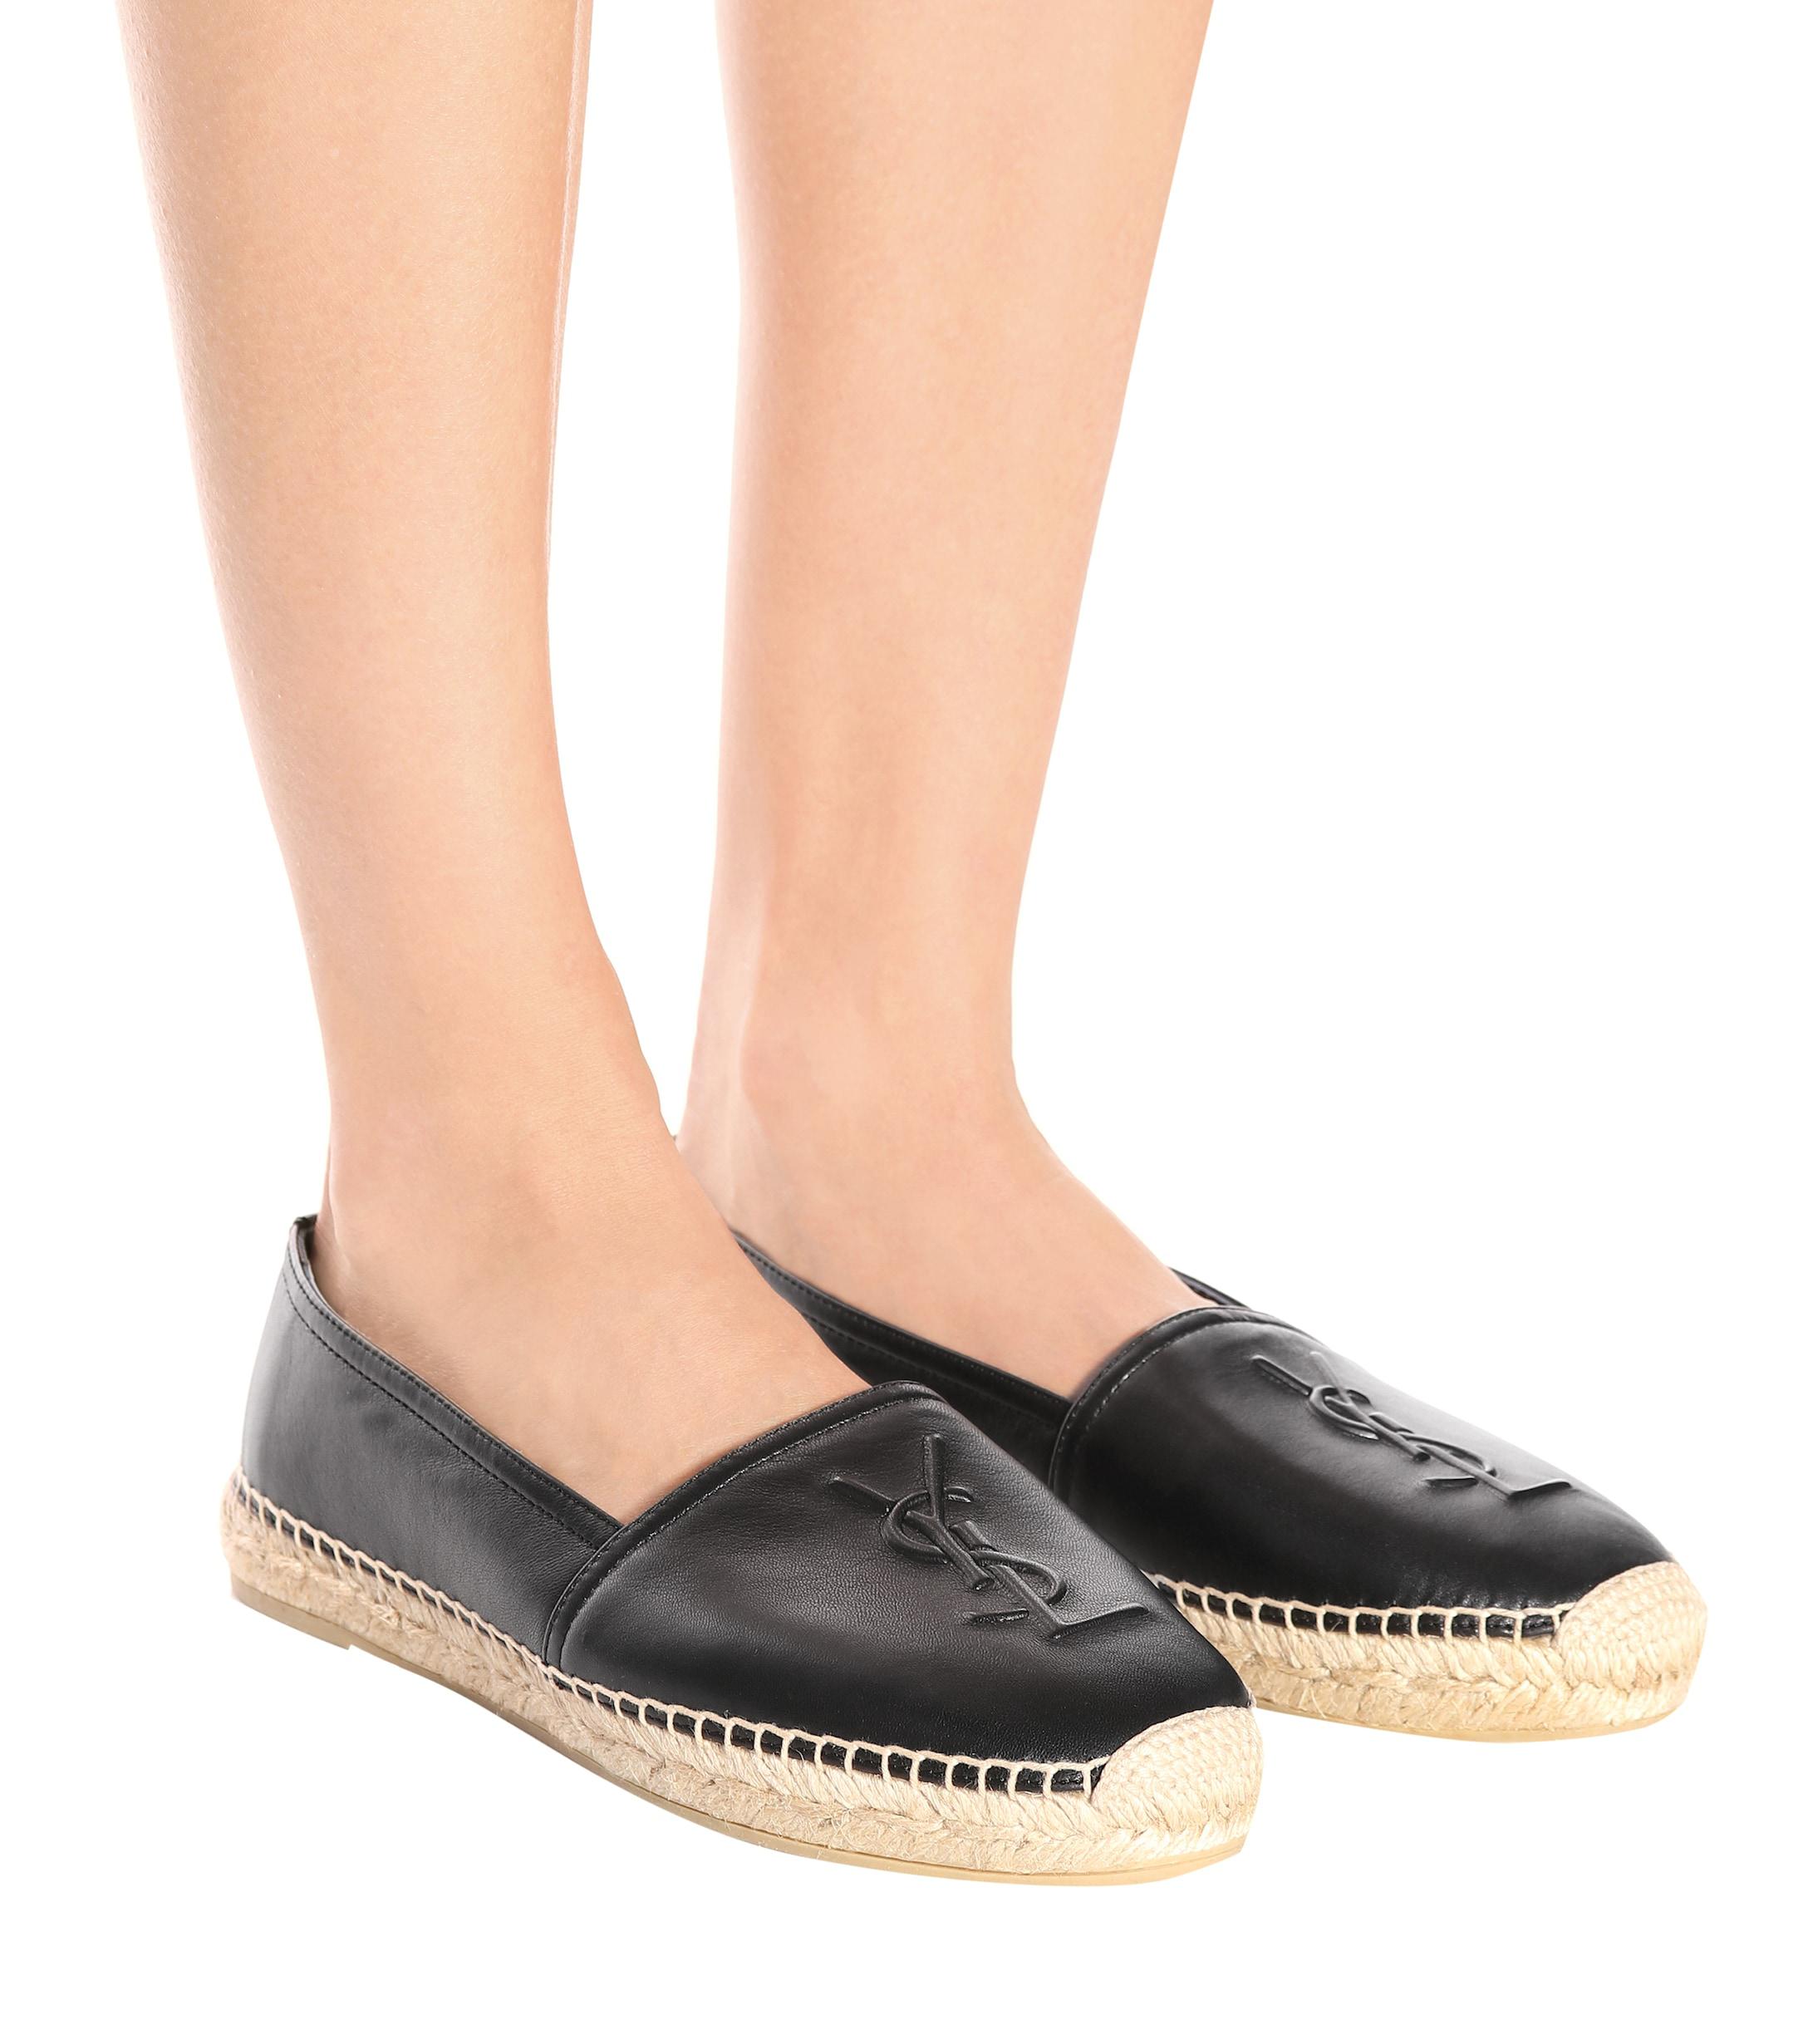 Saint Laurent Leather Slip-on Loafers in Nero (Black) - Lyst